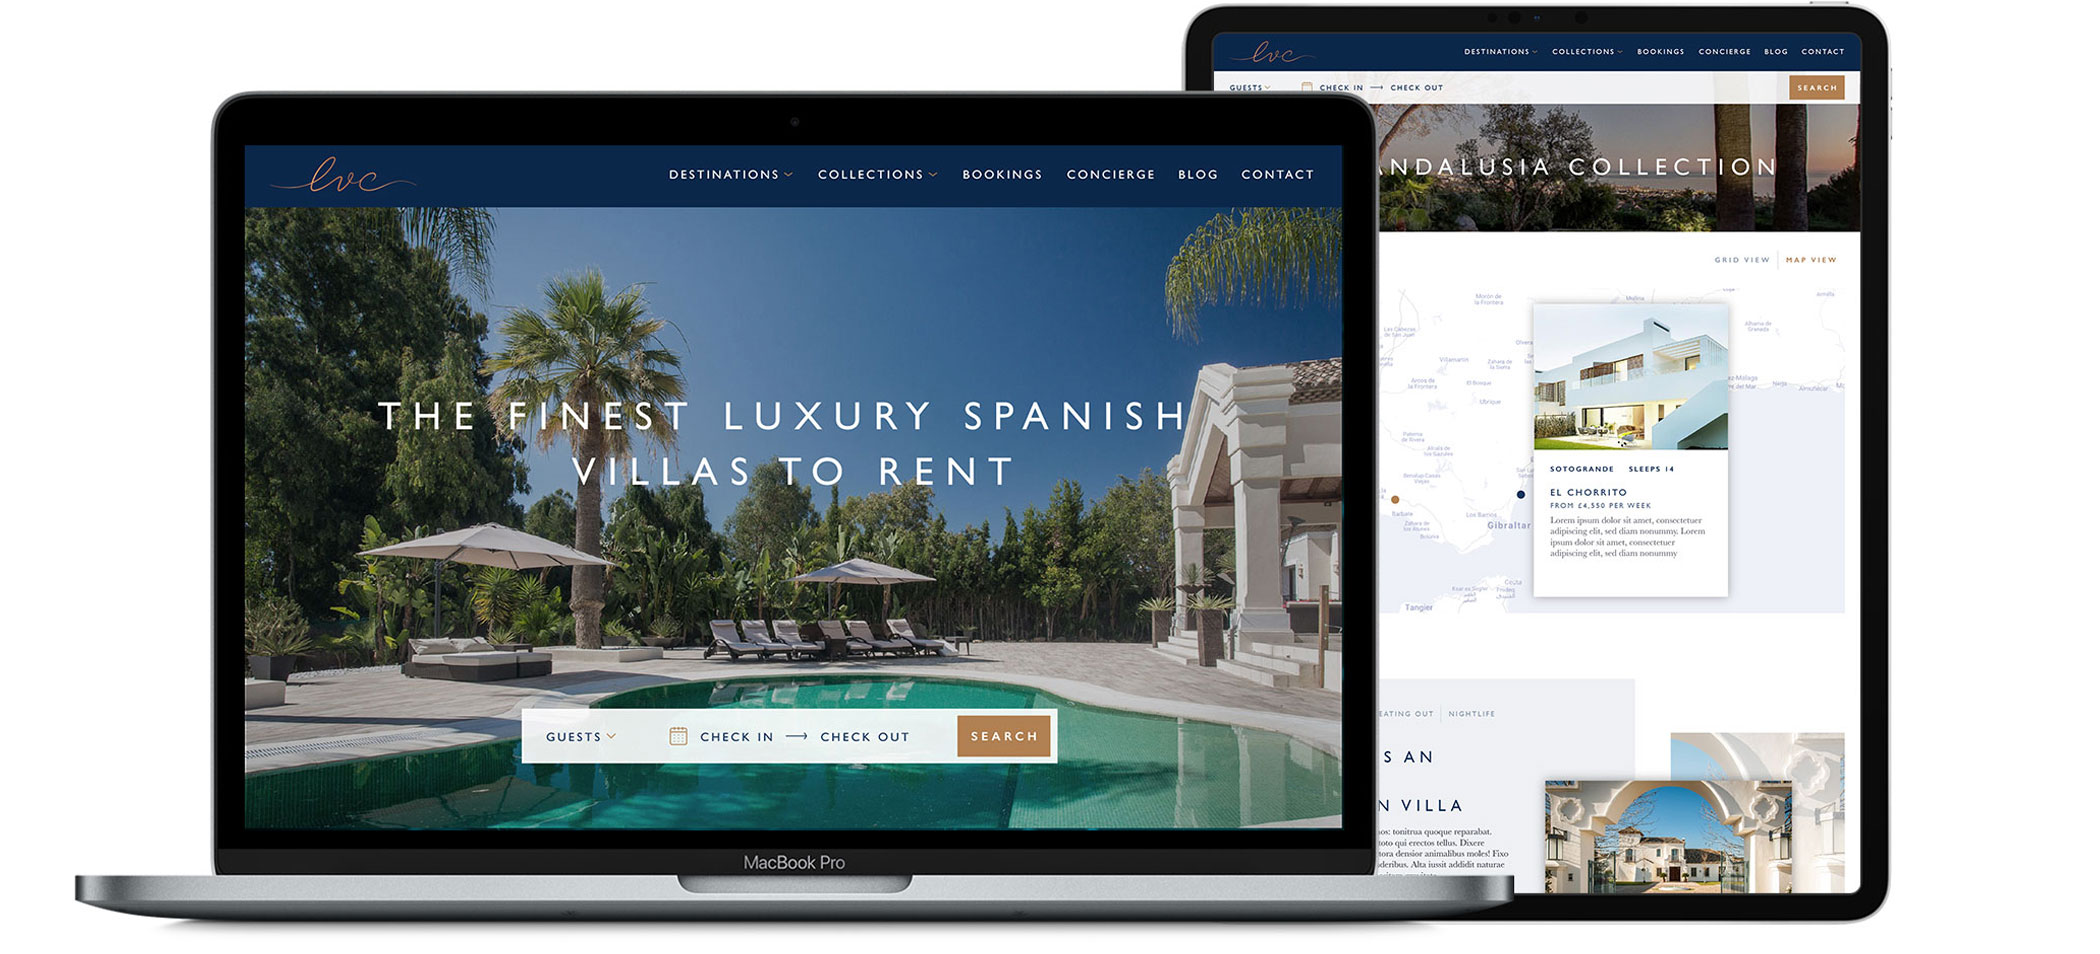 The Luxury Villa Collection website design on laptop and iPad